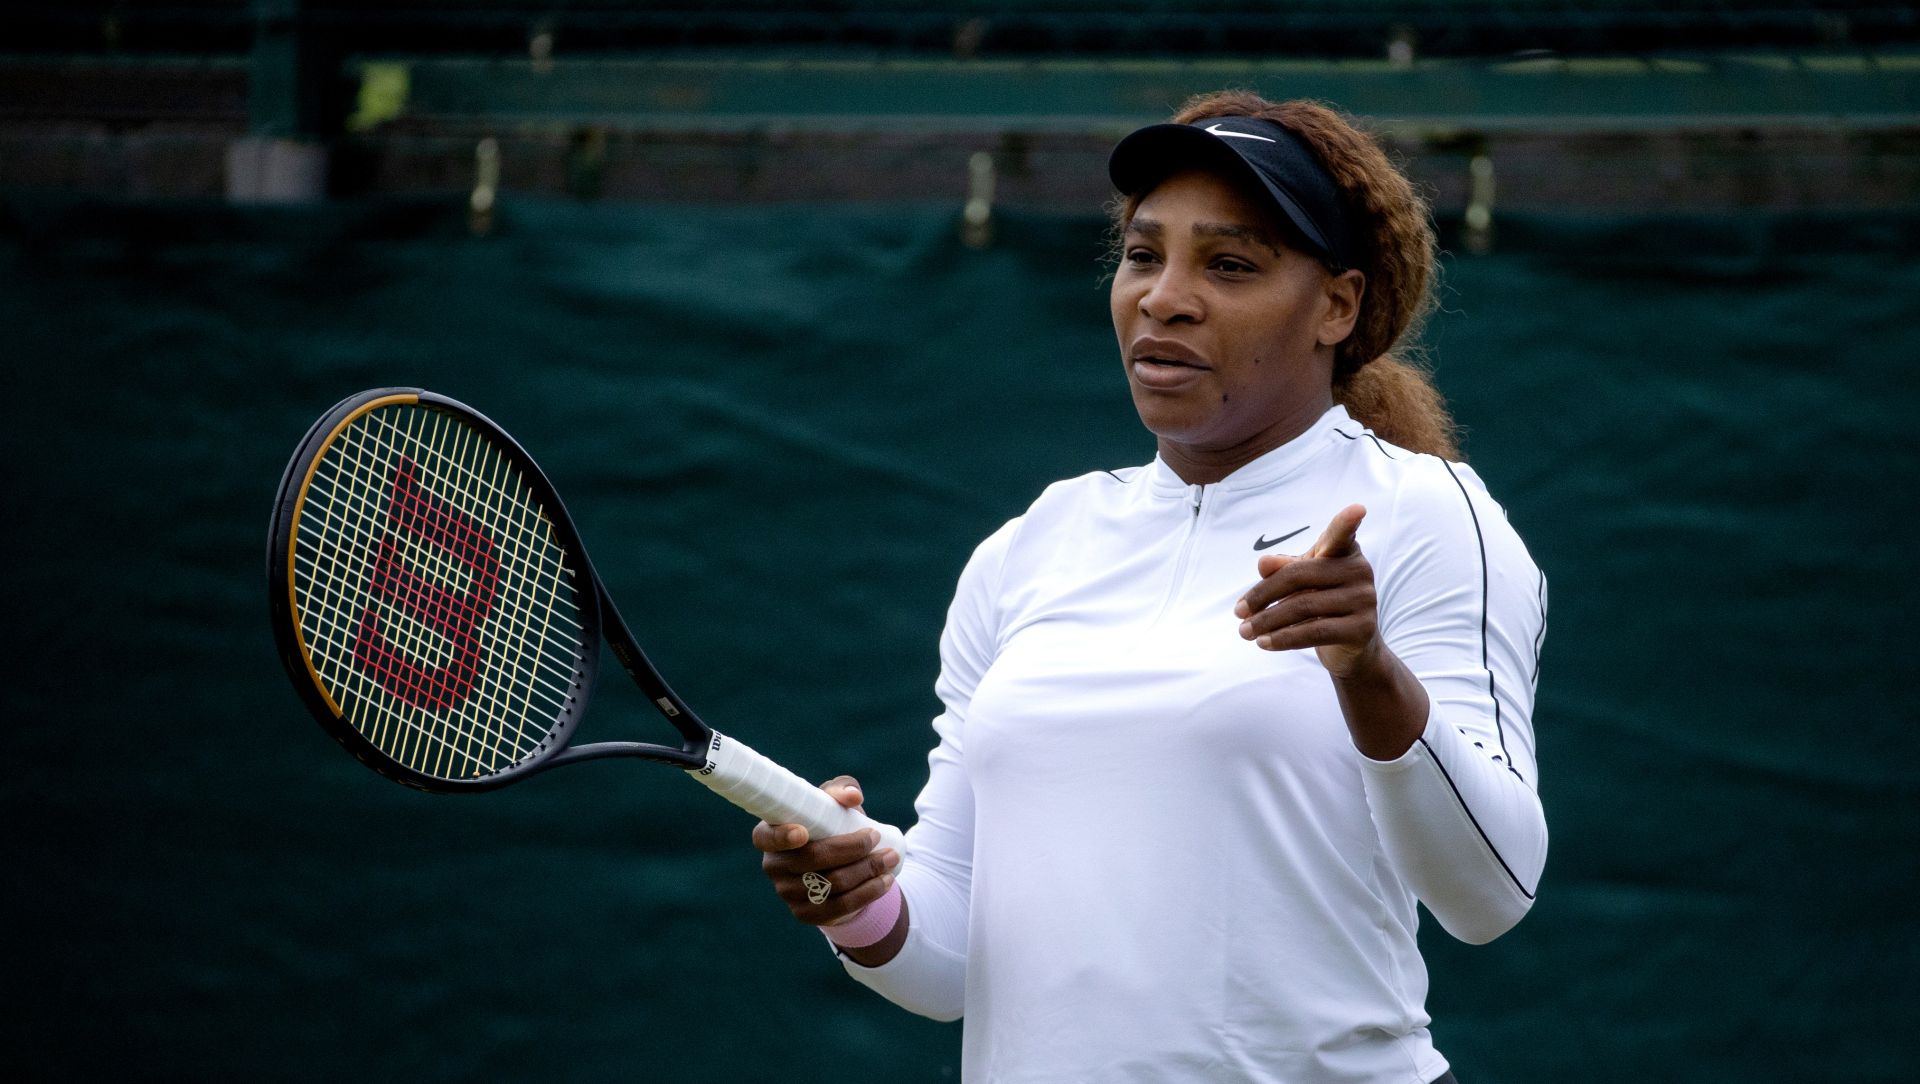 Wimbledon round-up, June 29, 2021 All the latest news from SW19 LiveScore